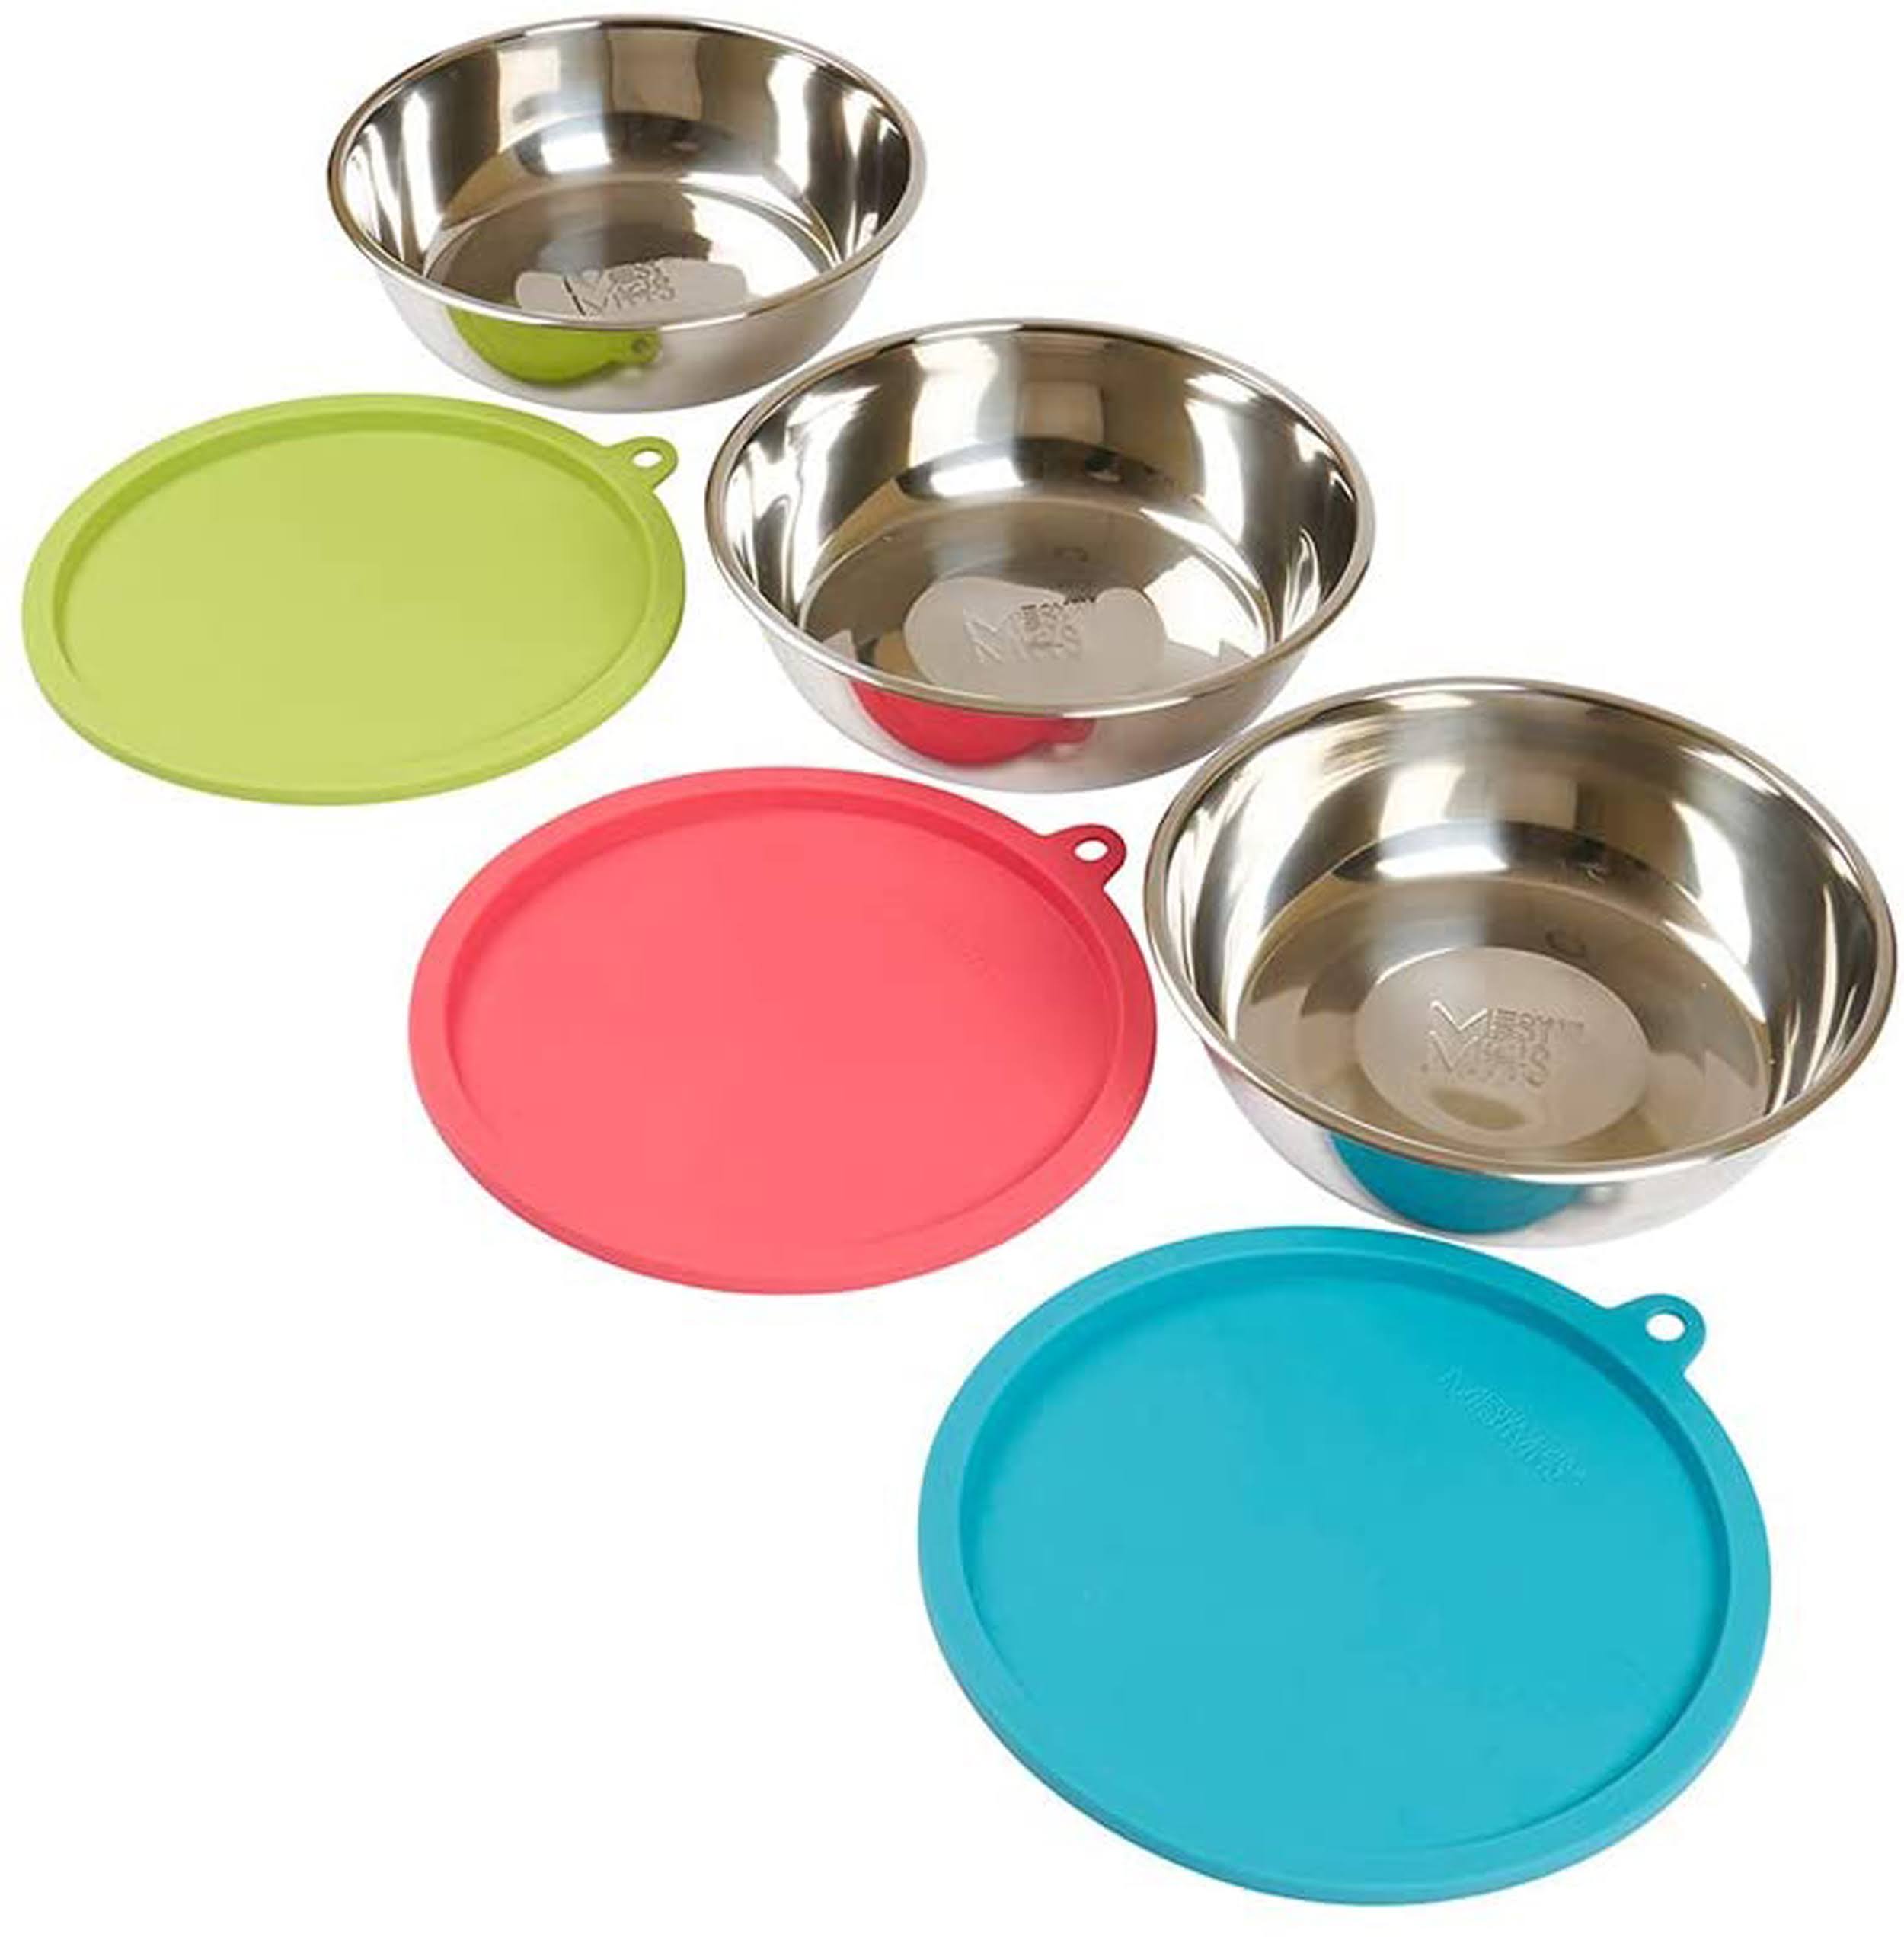 Messy Mutts Dog Bowl Saver Box Set - 3 Stainless Steel Bowls + 3 Silicone Lids - Large